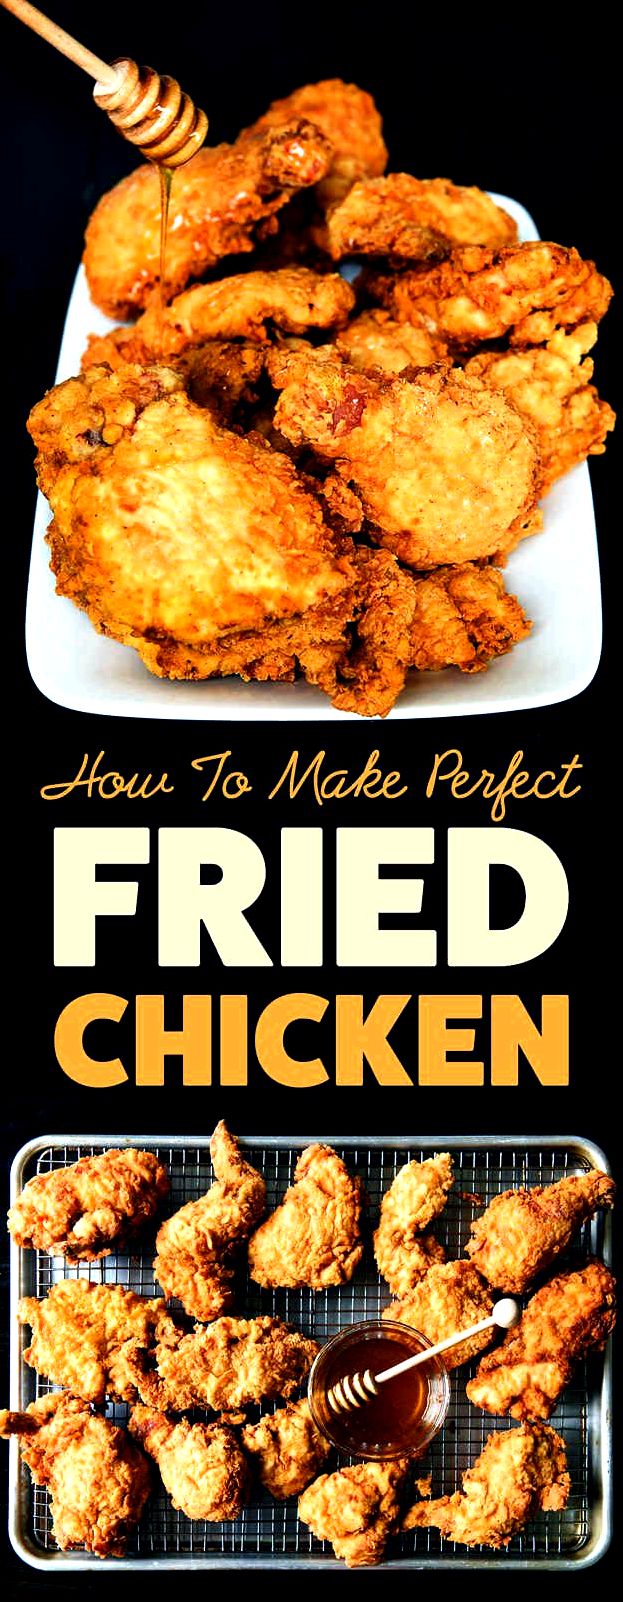 Steps to make fried chicken - nyt cooking when needed

     

     

    

     

    Preparation     

    

    Place chicken